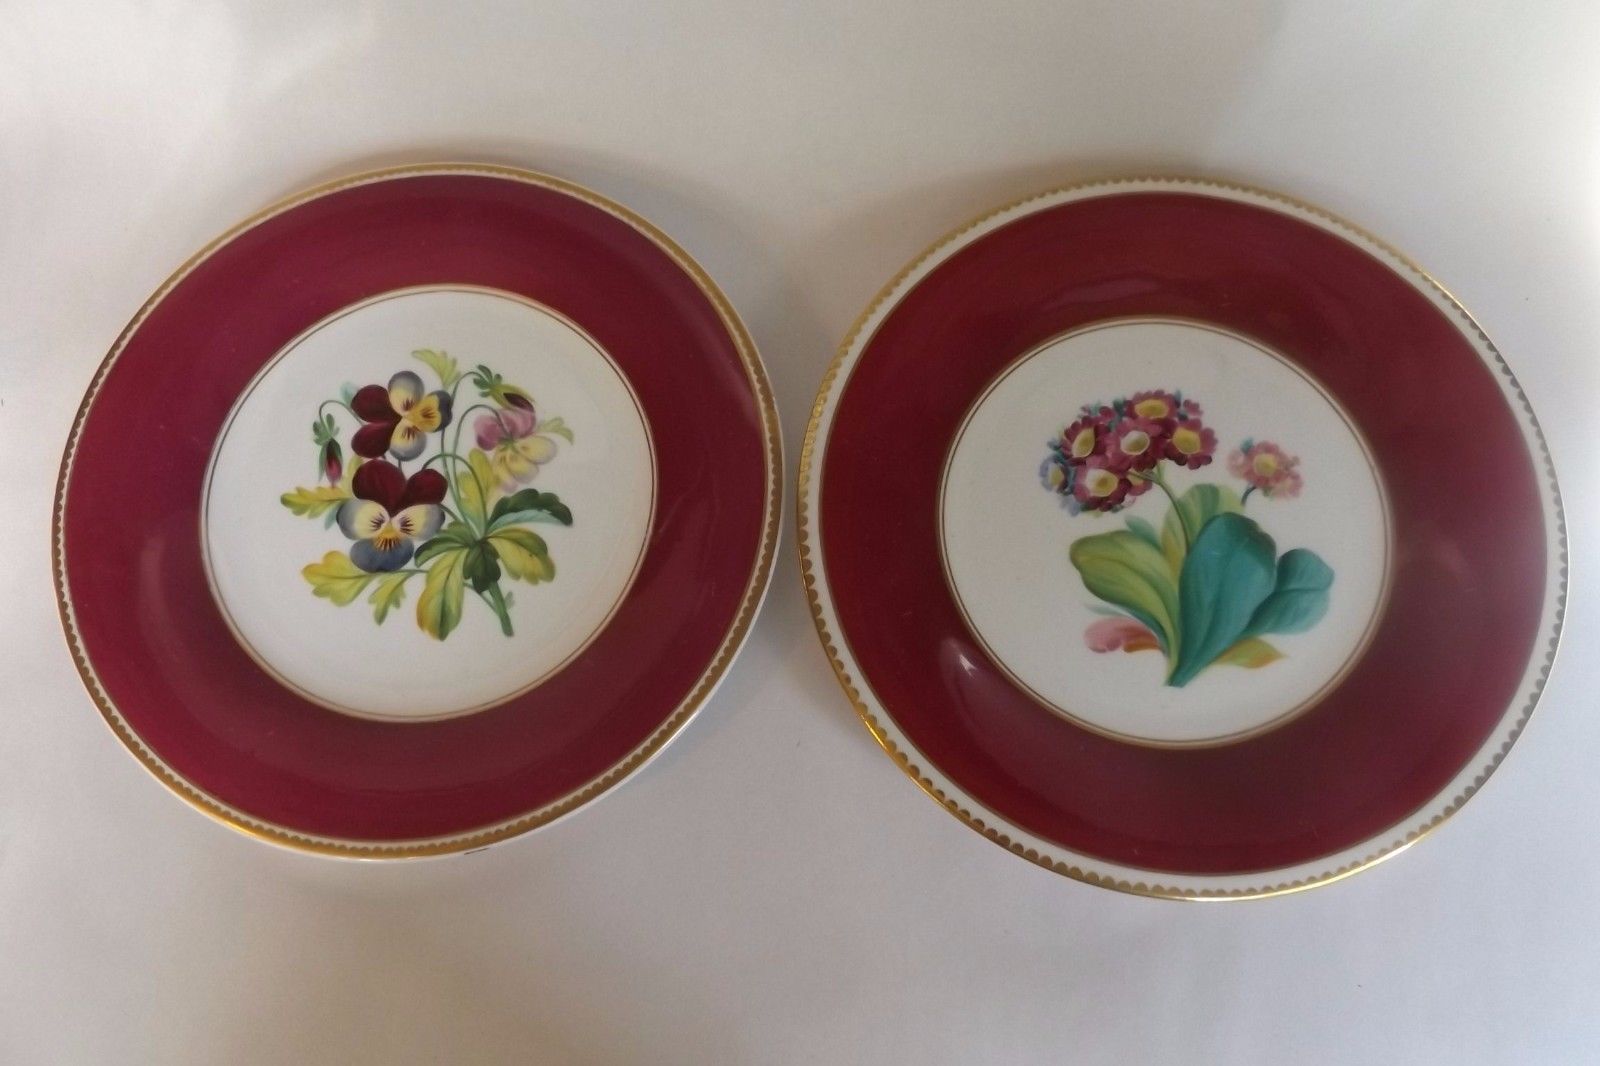 Pair of Early 19th C. English Cabinet Plates-Hand Painted Flowers & Magenta Trim